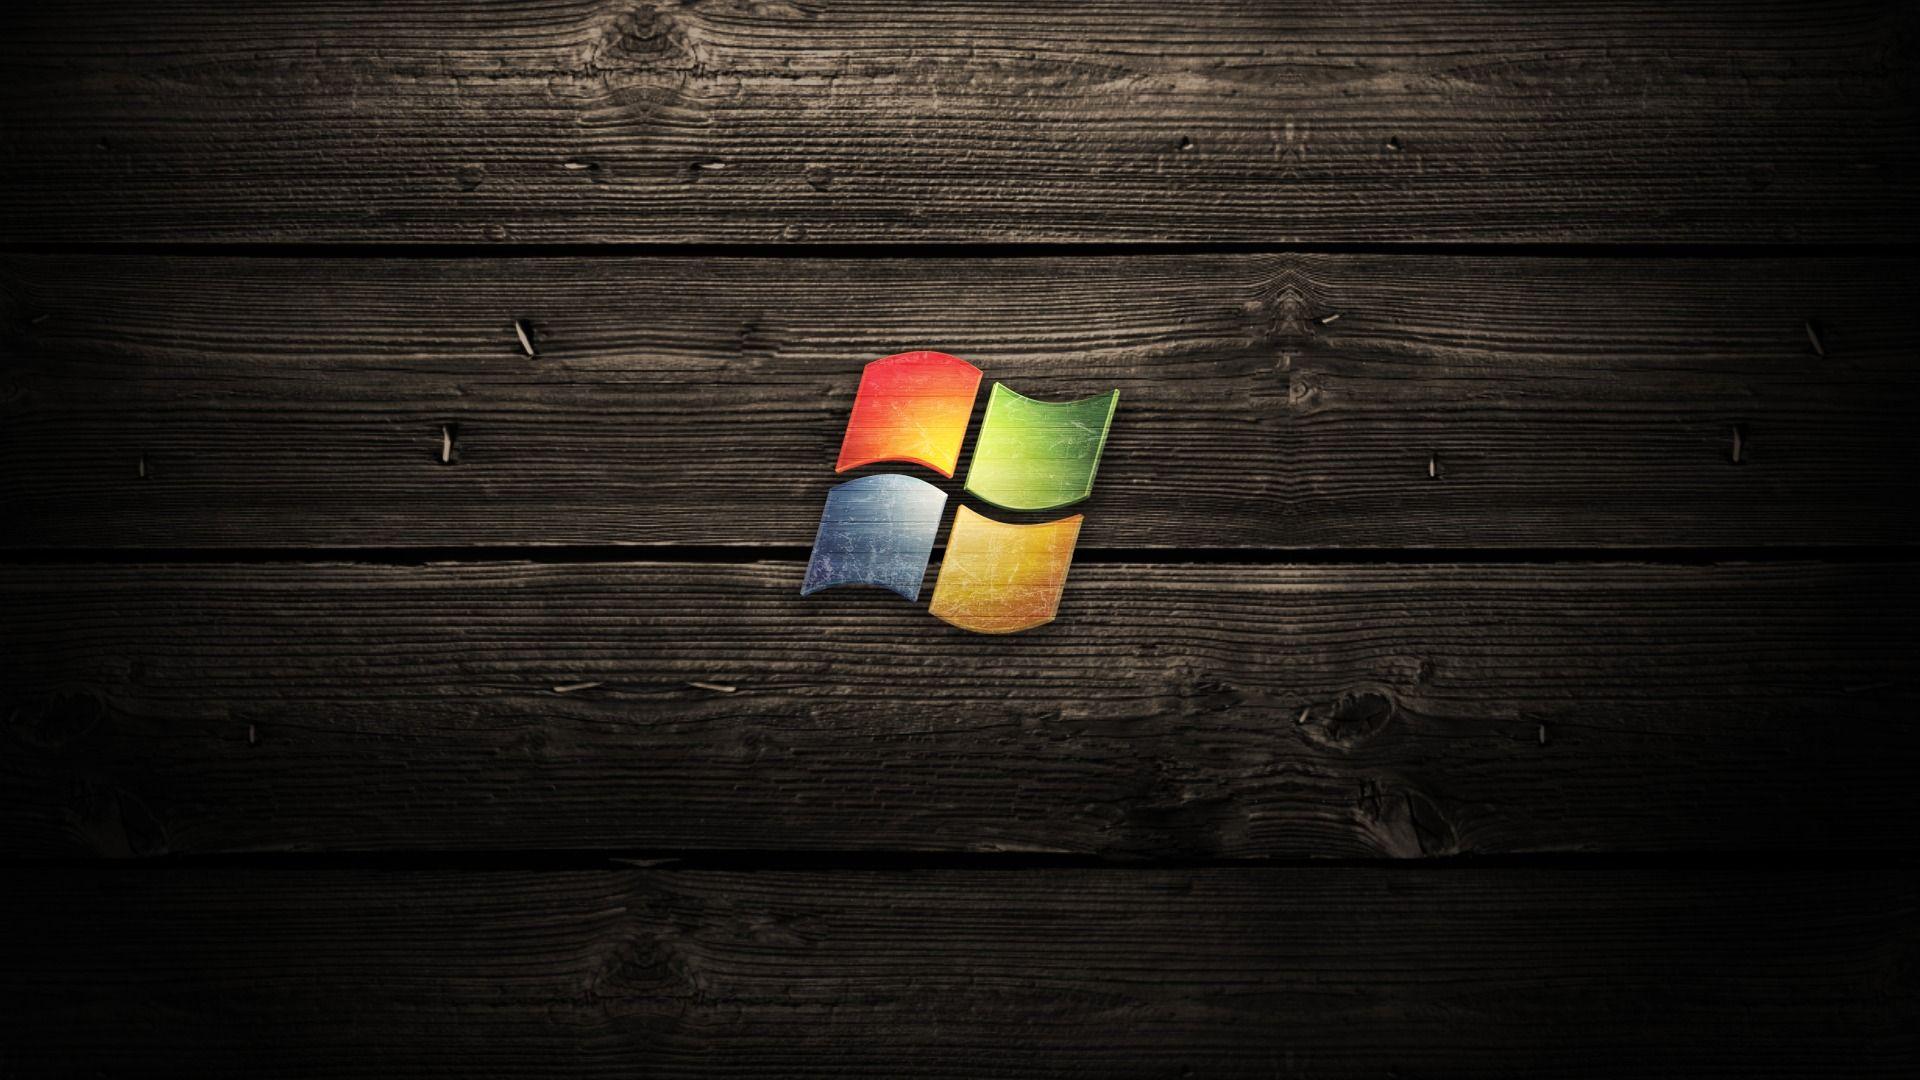 Windows Wallpapers 1920x1080 - Wallpaper Cave
 Full Hd Wallpapers For Windows 8 1920x1080